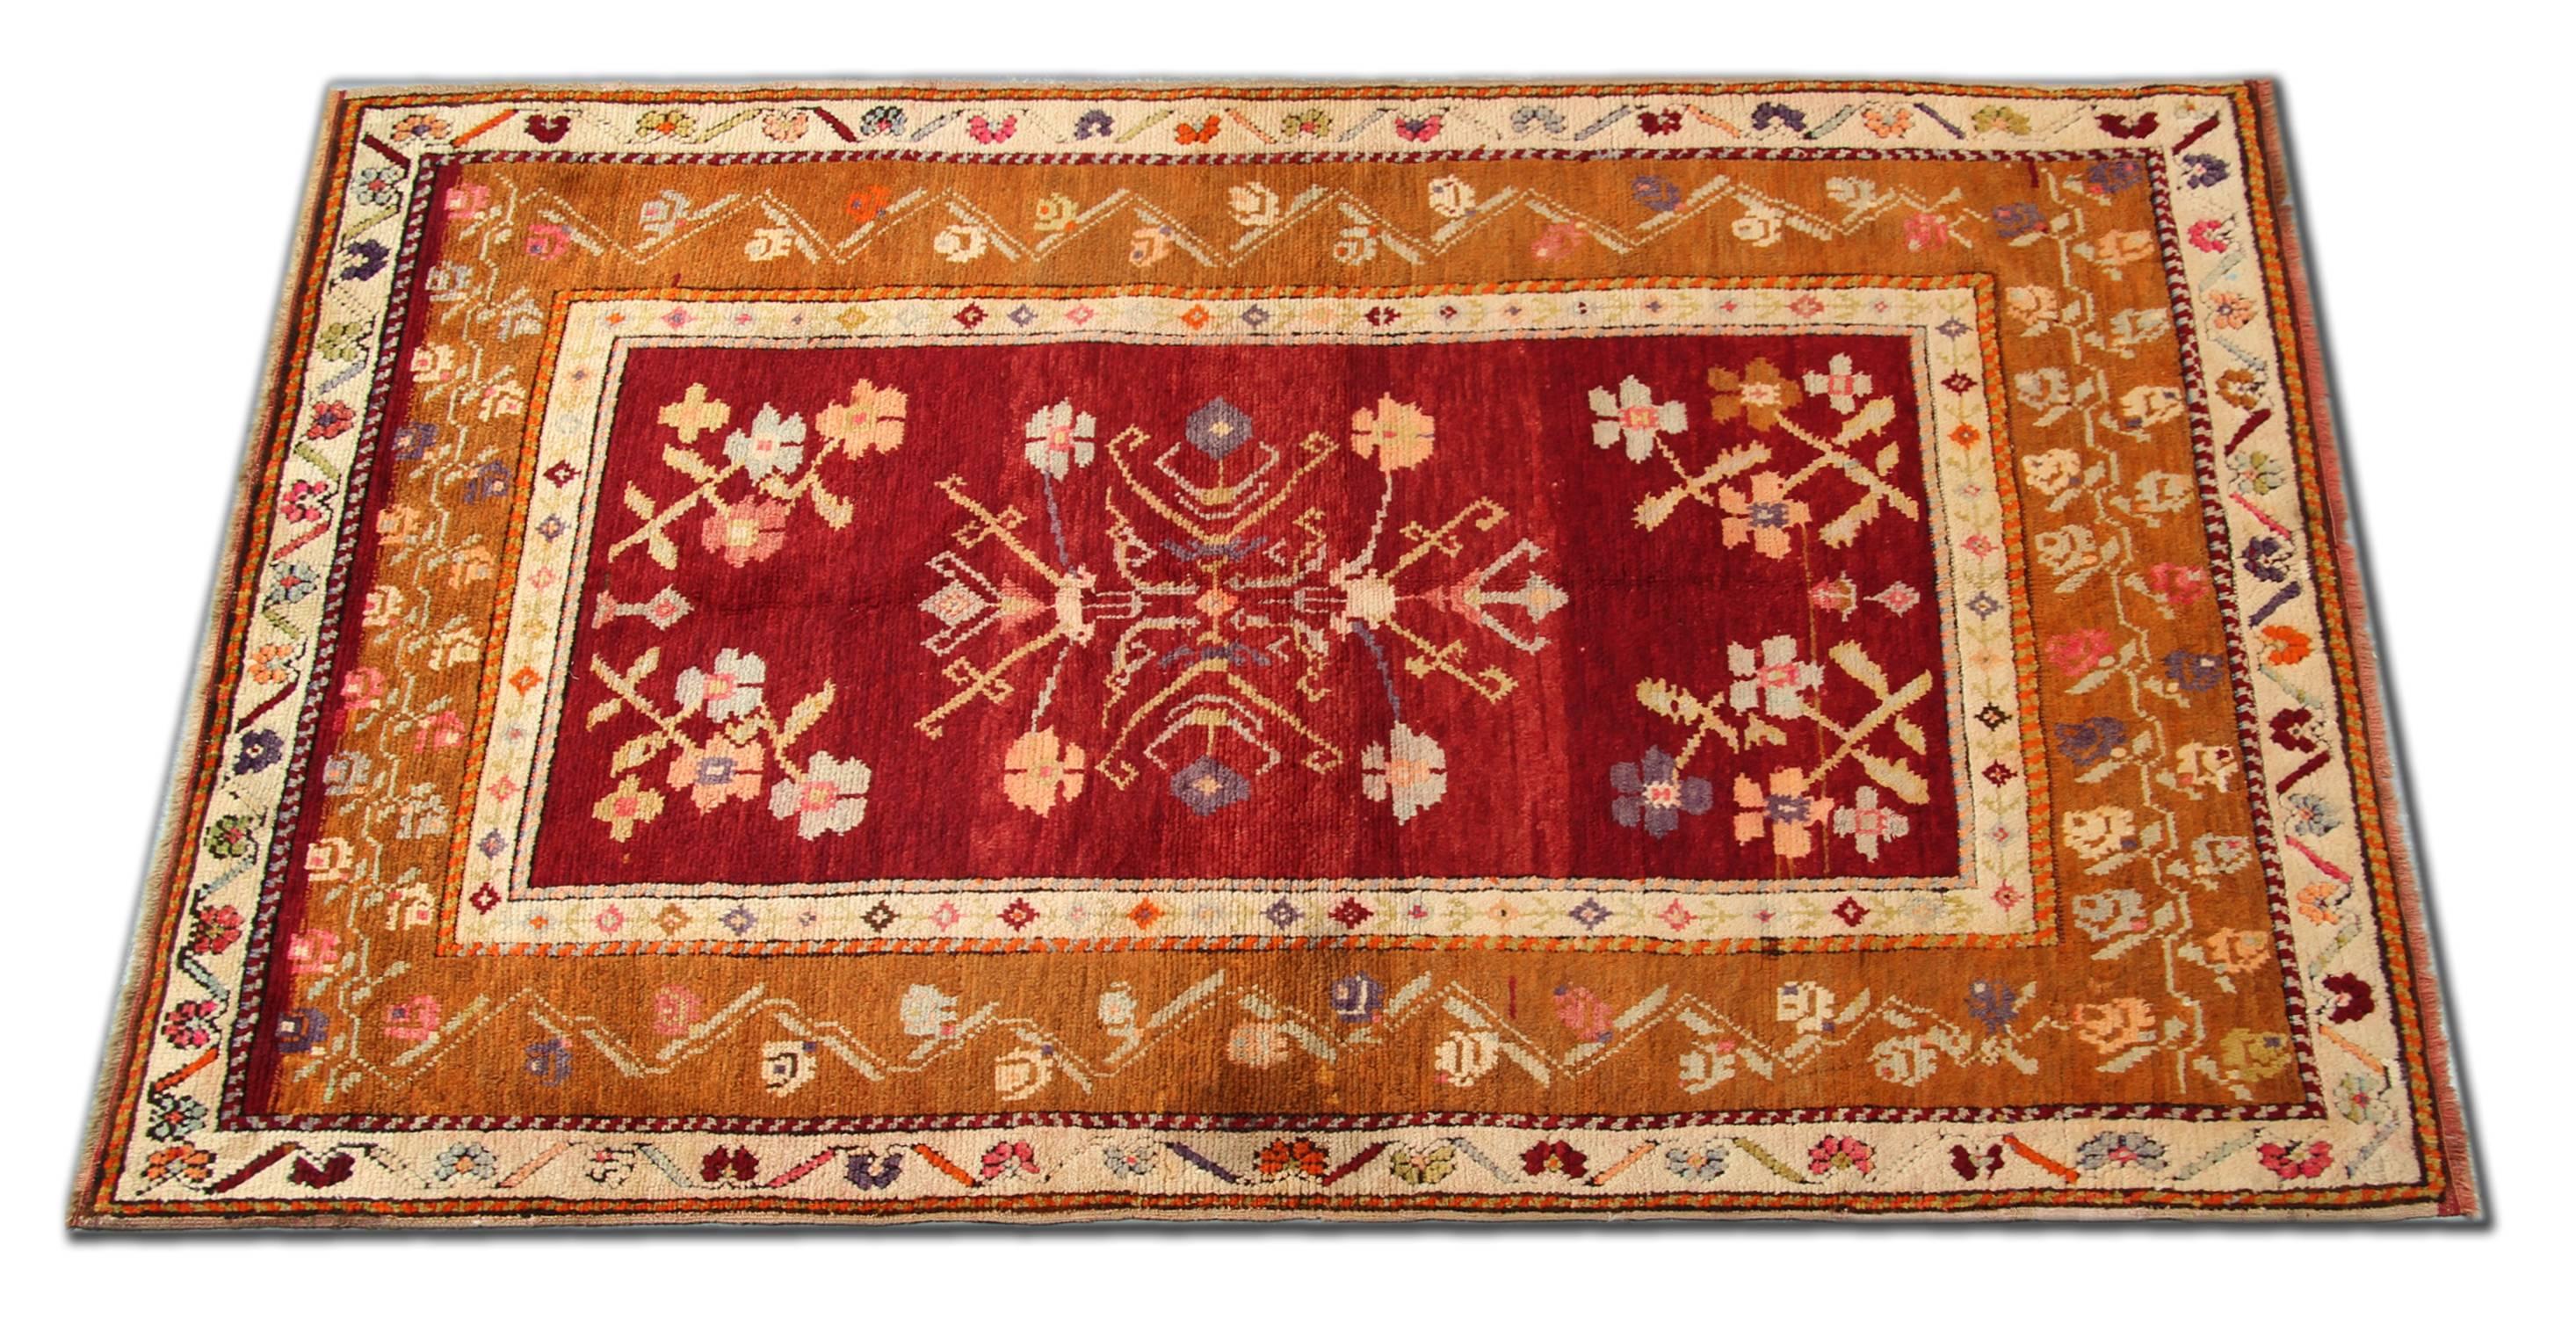 This red rug is a kind of beautiful hand knotted Turkish carpets or Anatolian rugs with geometric rug pattern and very elegant tribal and floral rug design. These wool rugs have vibrant natural dyes. The combination of rust red, orange, and gold in